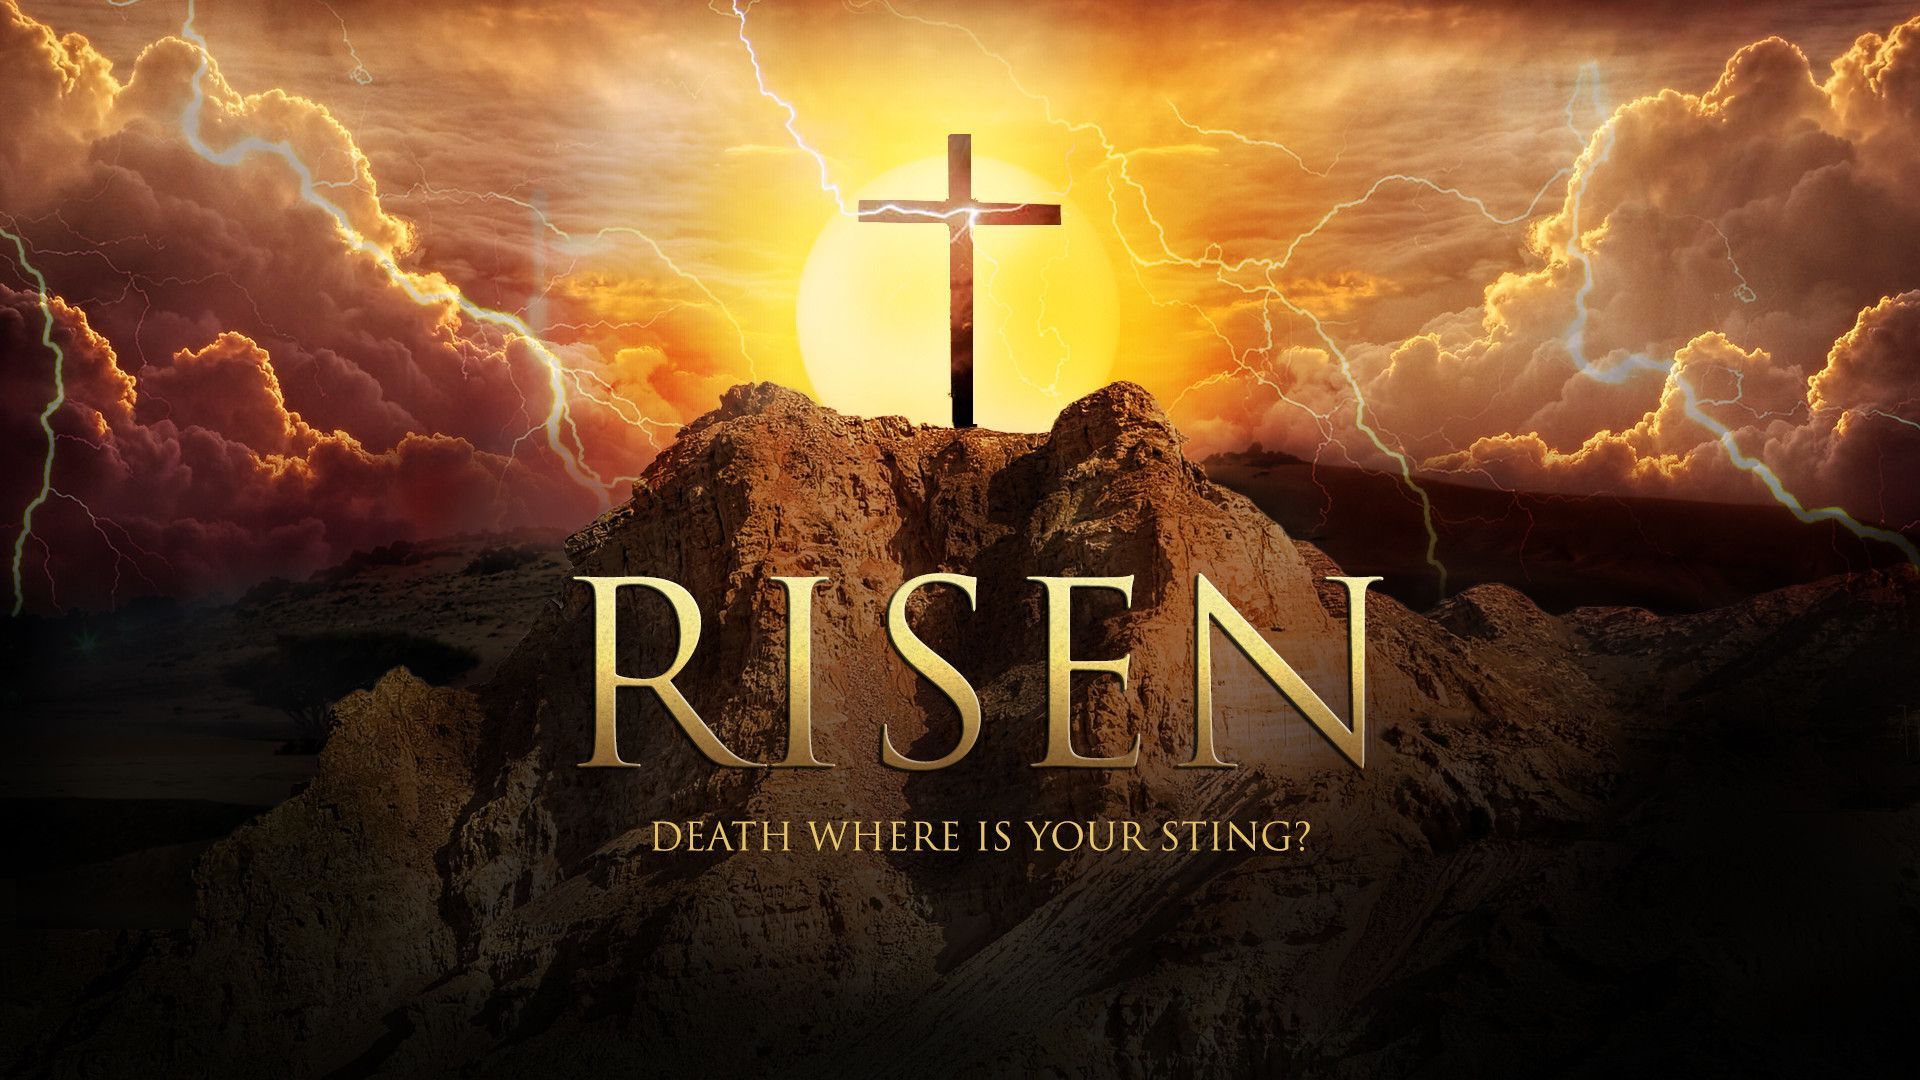 Easter Religious 2021 Wallpapers - Wallpaper Cave